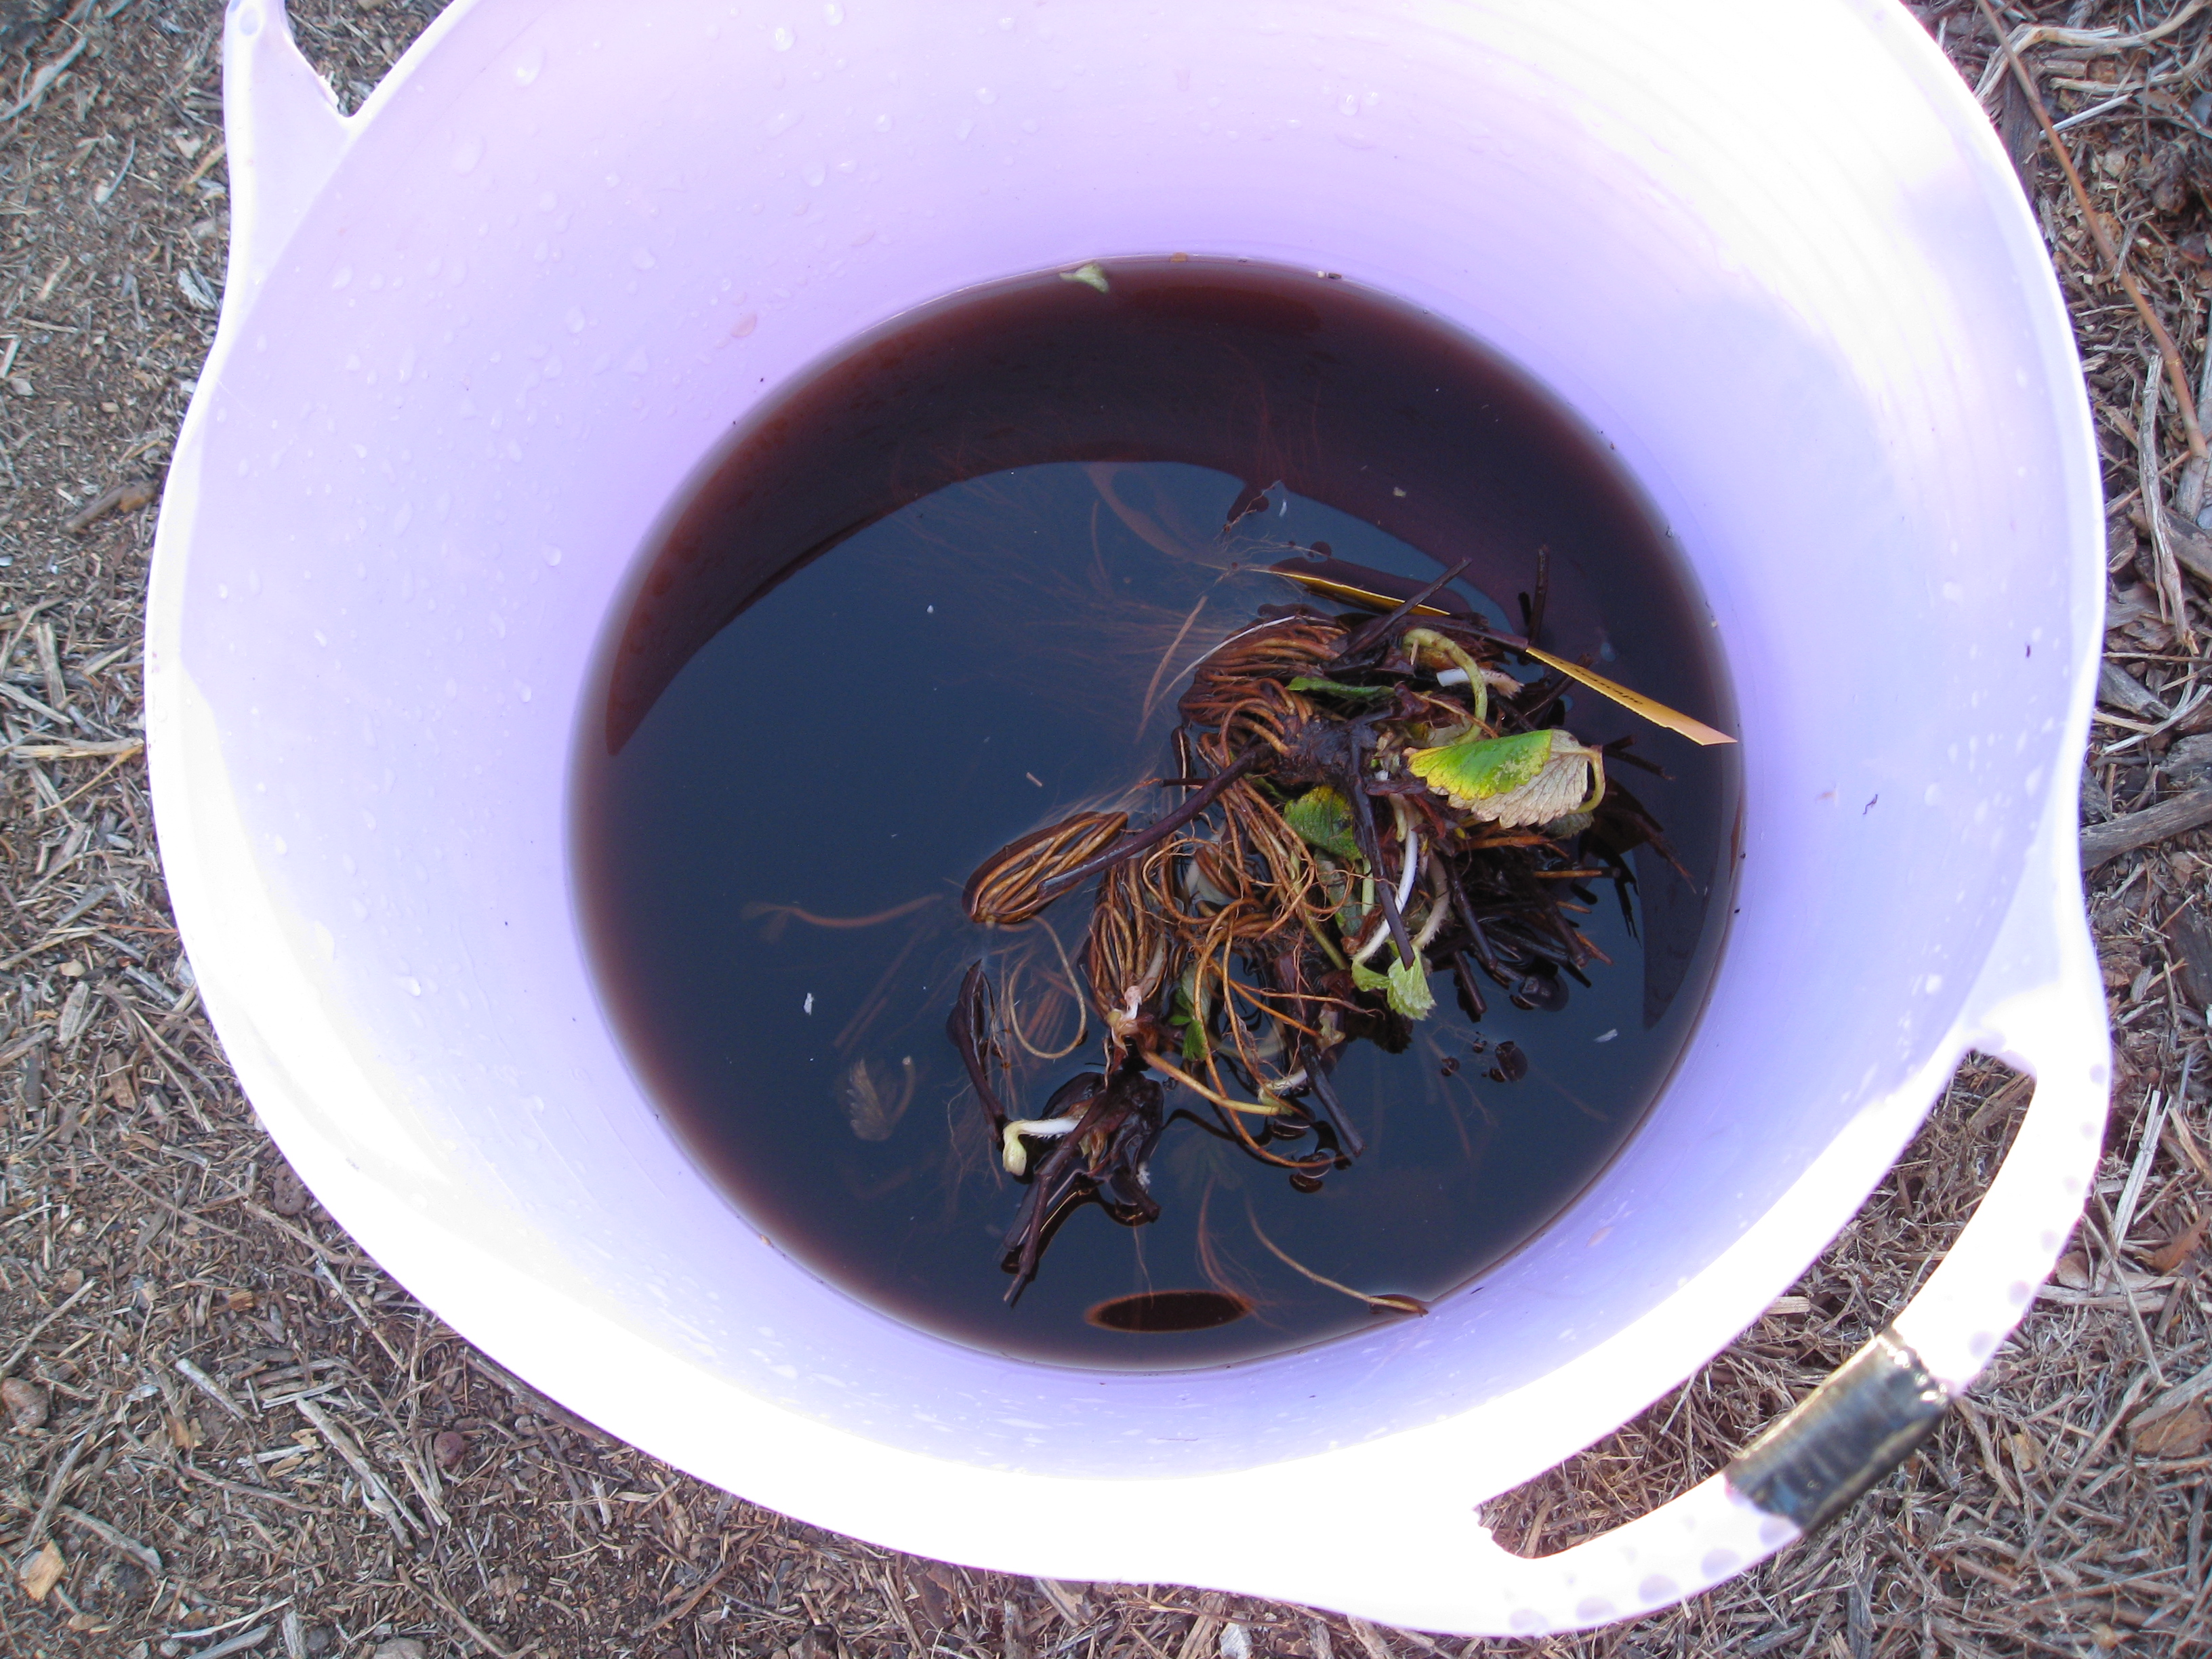 We soaked our plants in kelp emulsion for a few minutes to hydrate and feed. 